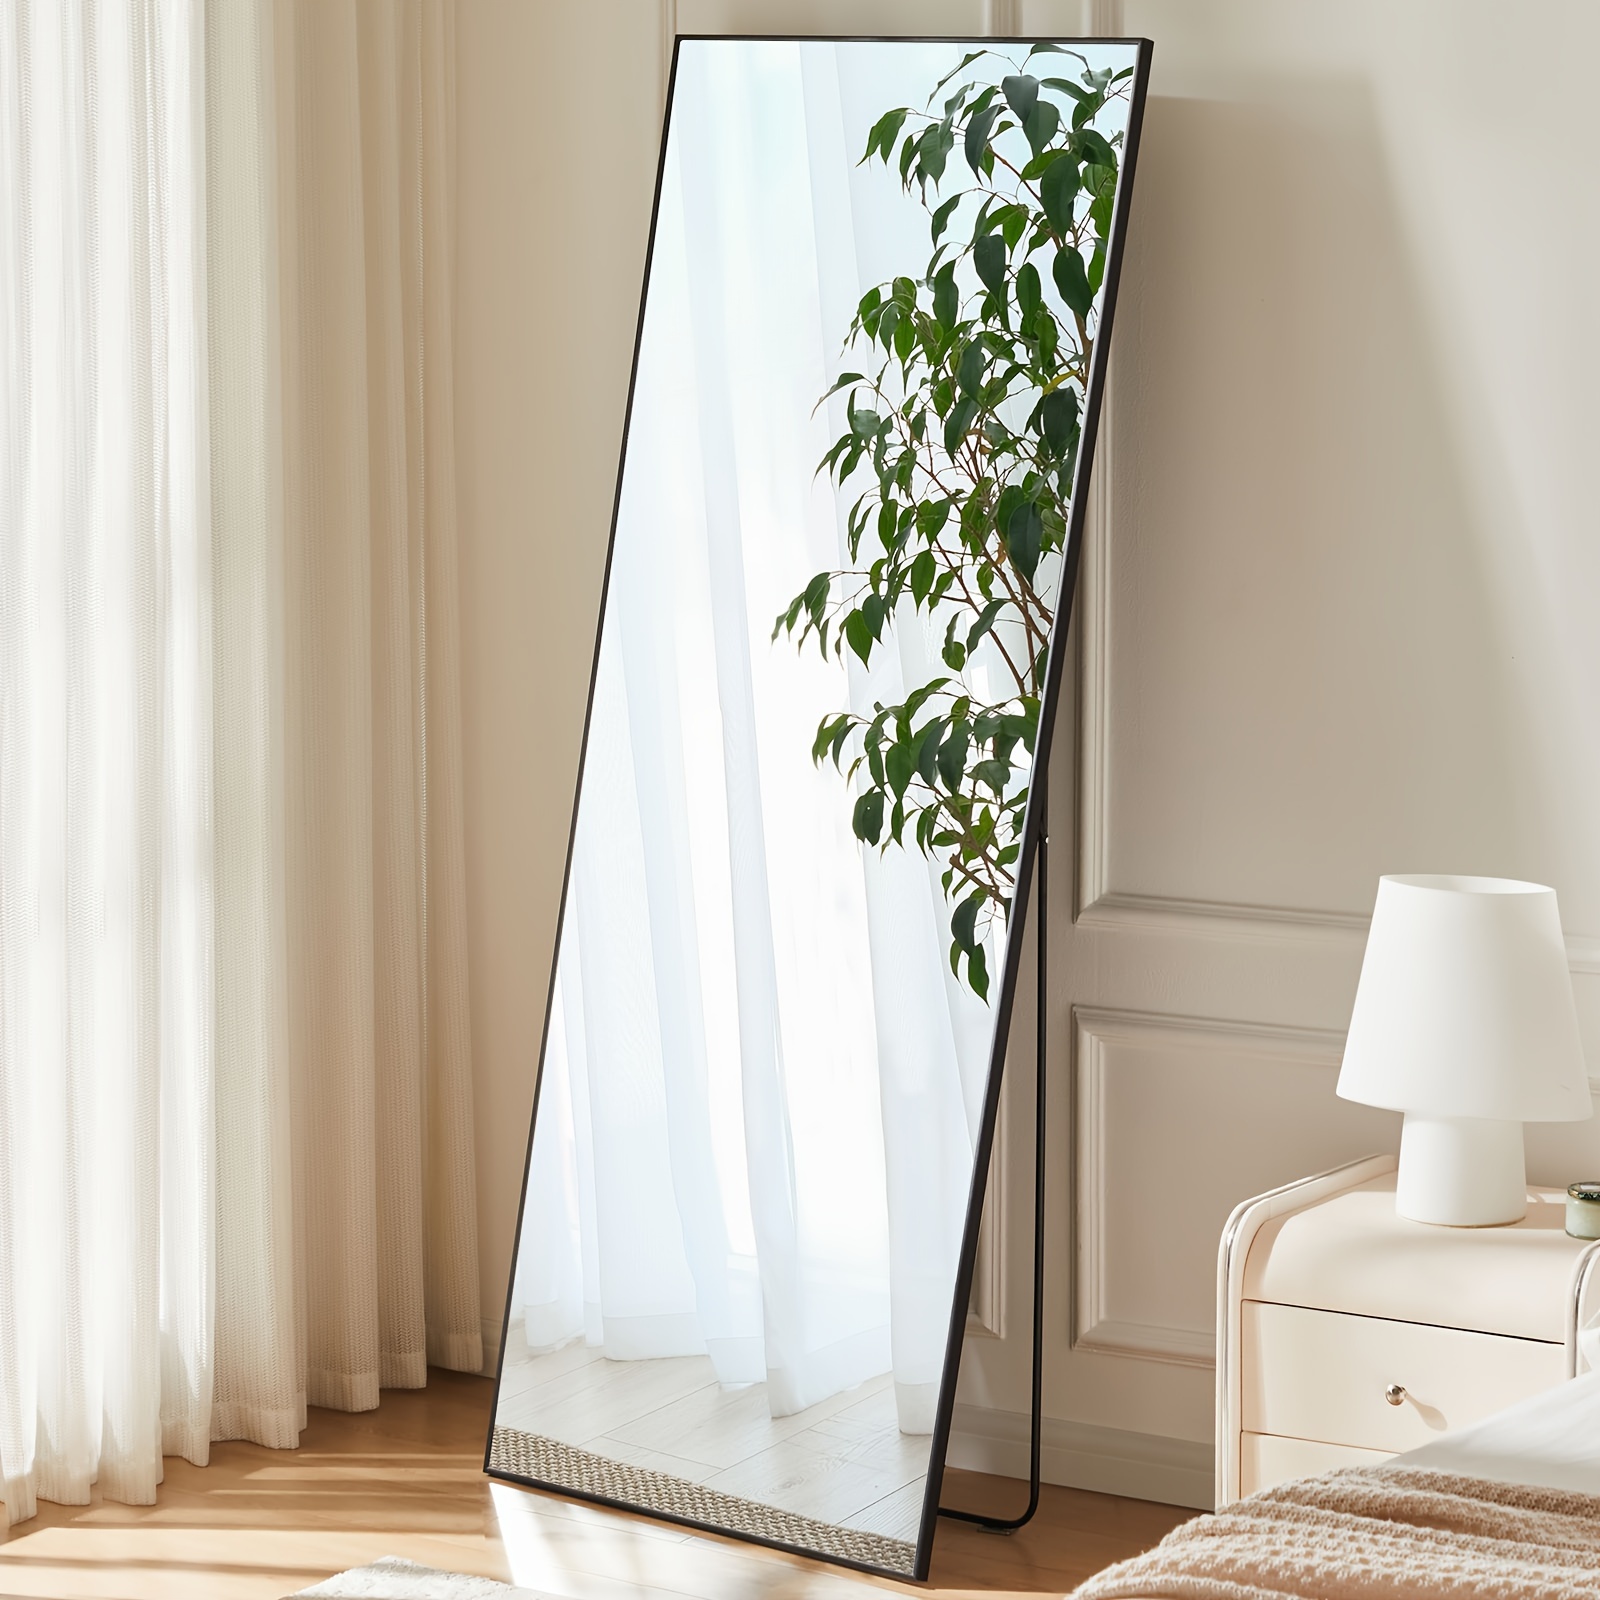 

1pc Full-length Mirror, 64"x21", Classic Style, Floor Standing Rectangular Mirror, Aluminum Alloy Frame, Hd-imaging Glass, Explosion-proof Film Protection For Bedroom & Living Room Decor